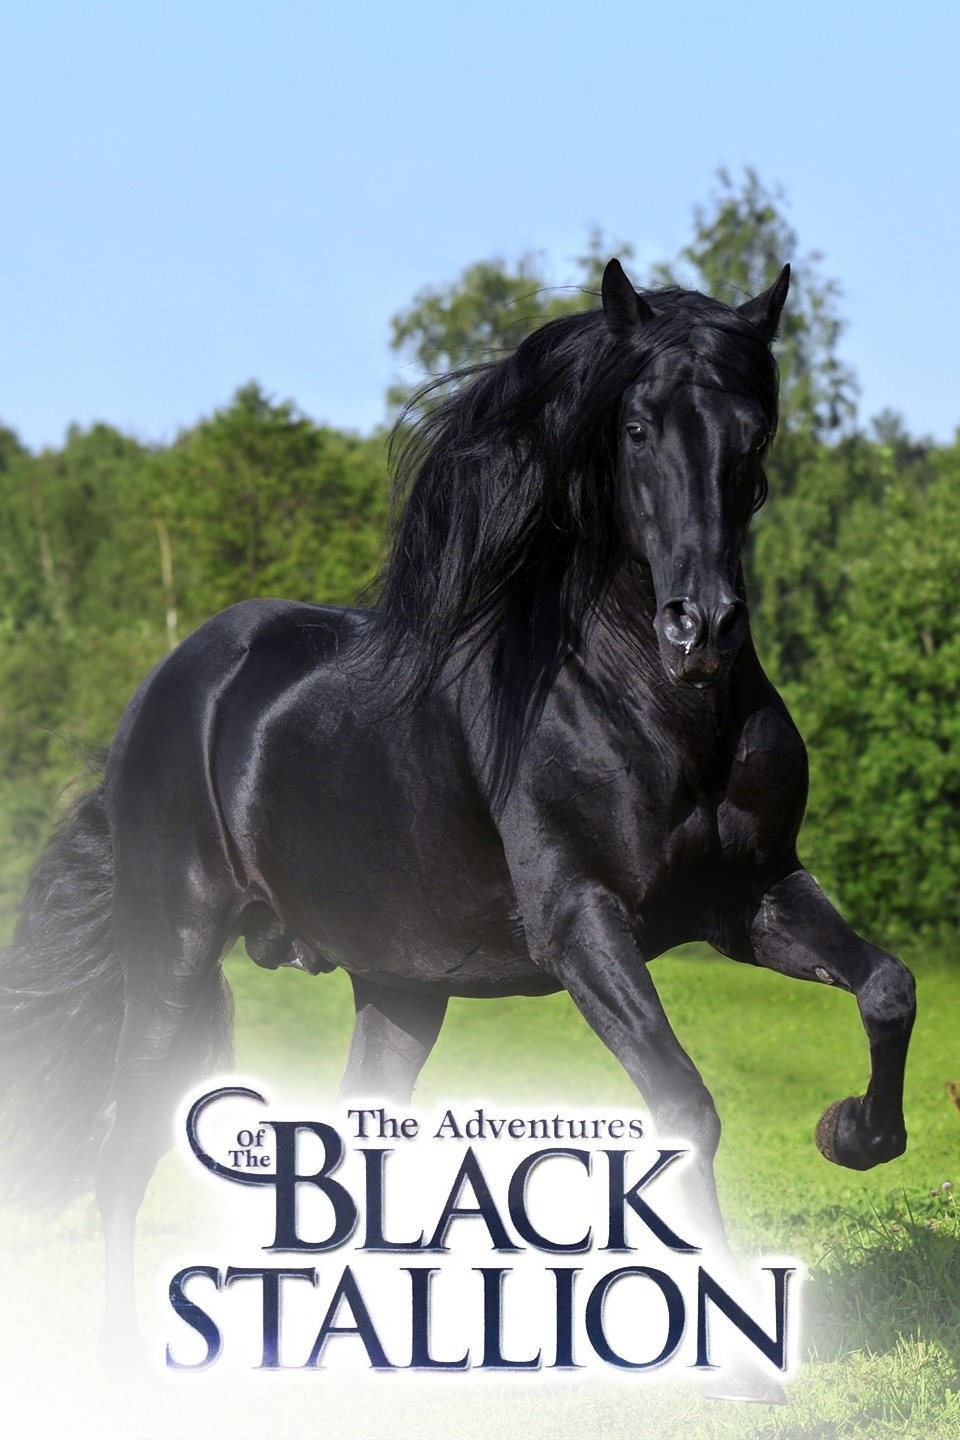 The Adventures of the Black Stallion | Rotten Tomatoes